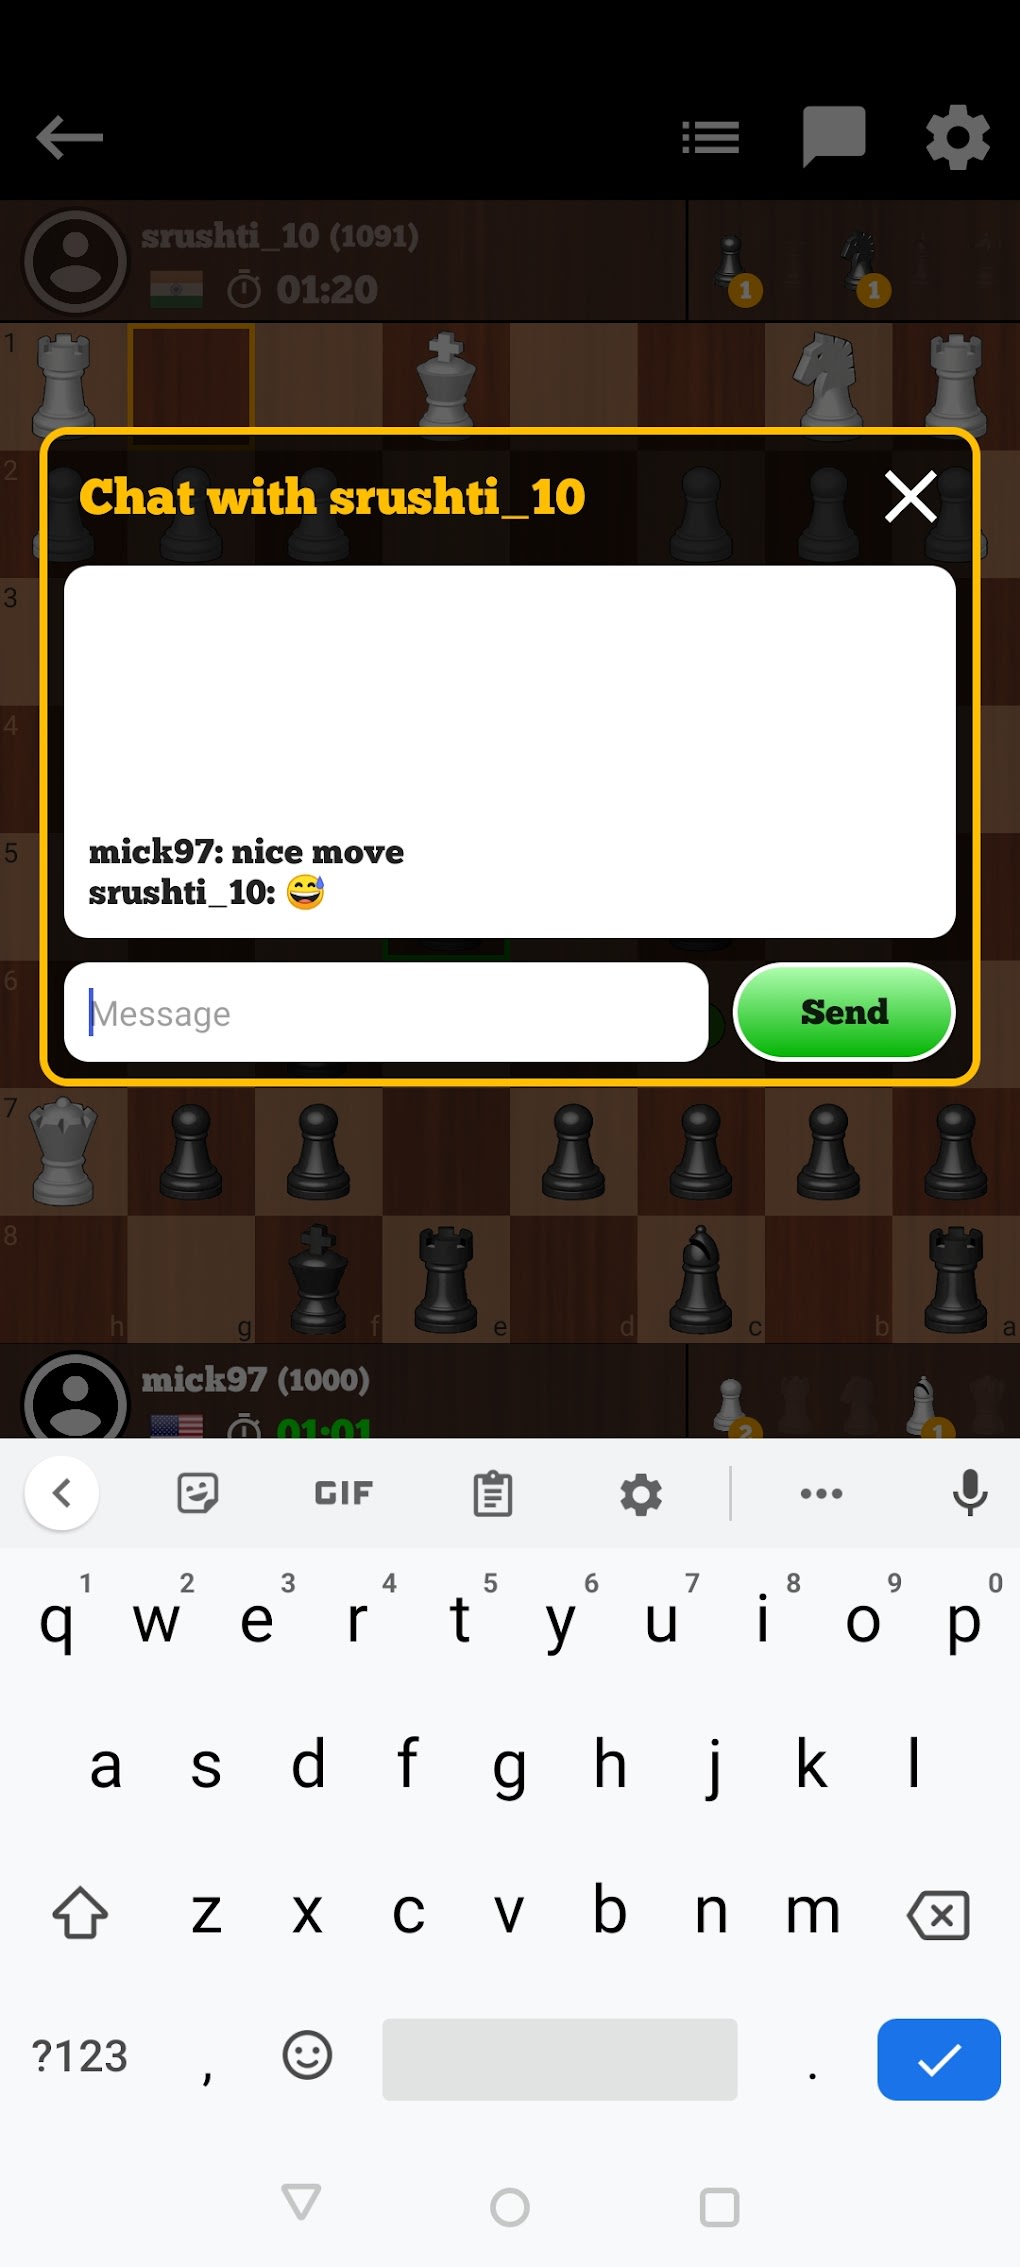 Chess Online - Duel friends! – Apps on Google Play